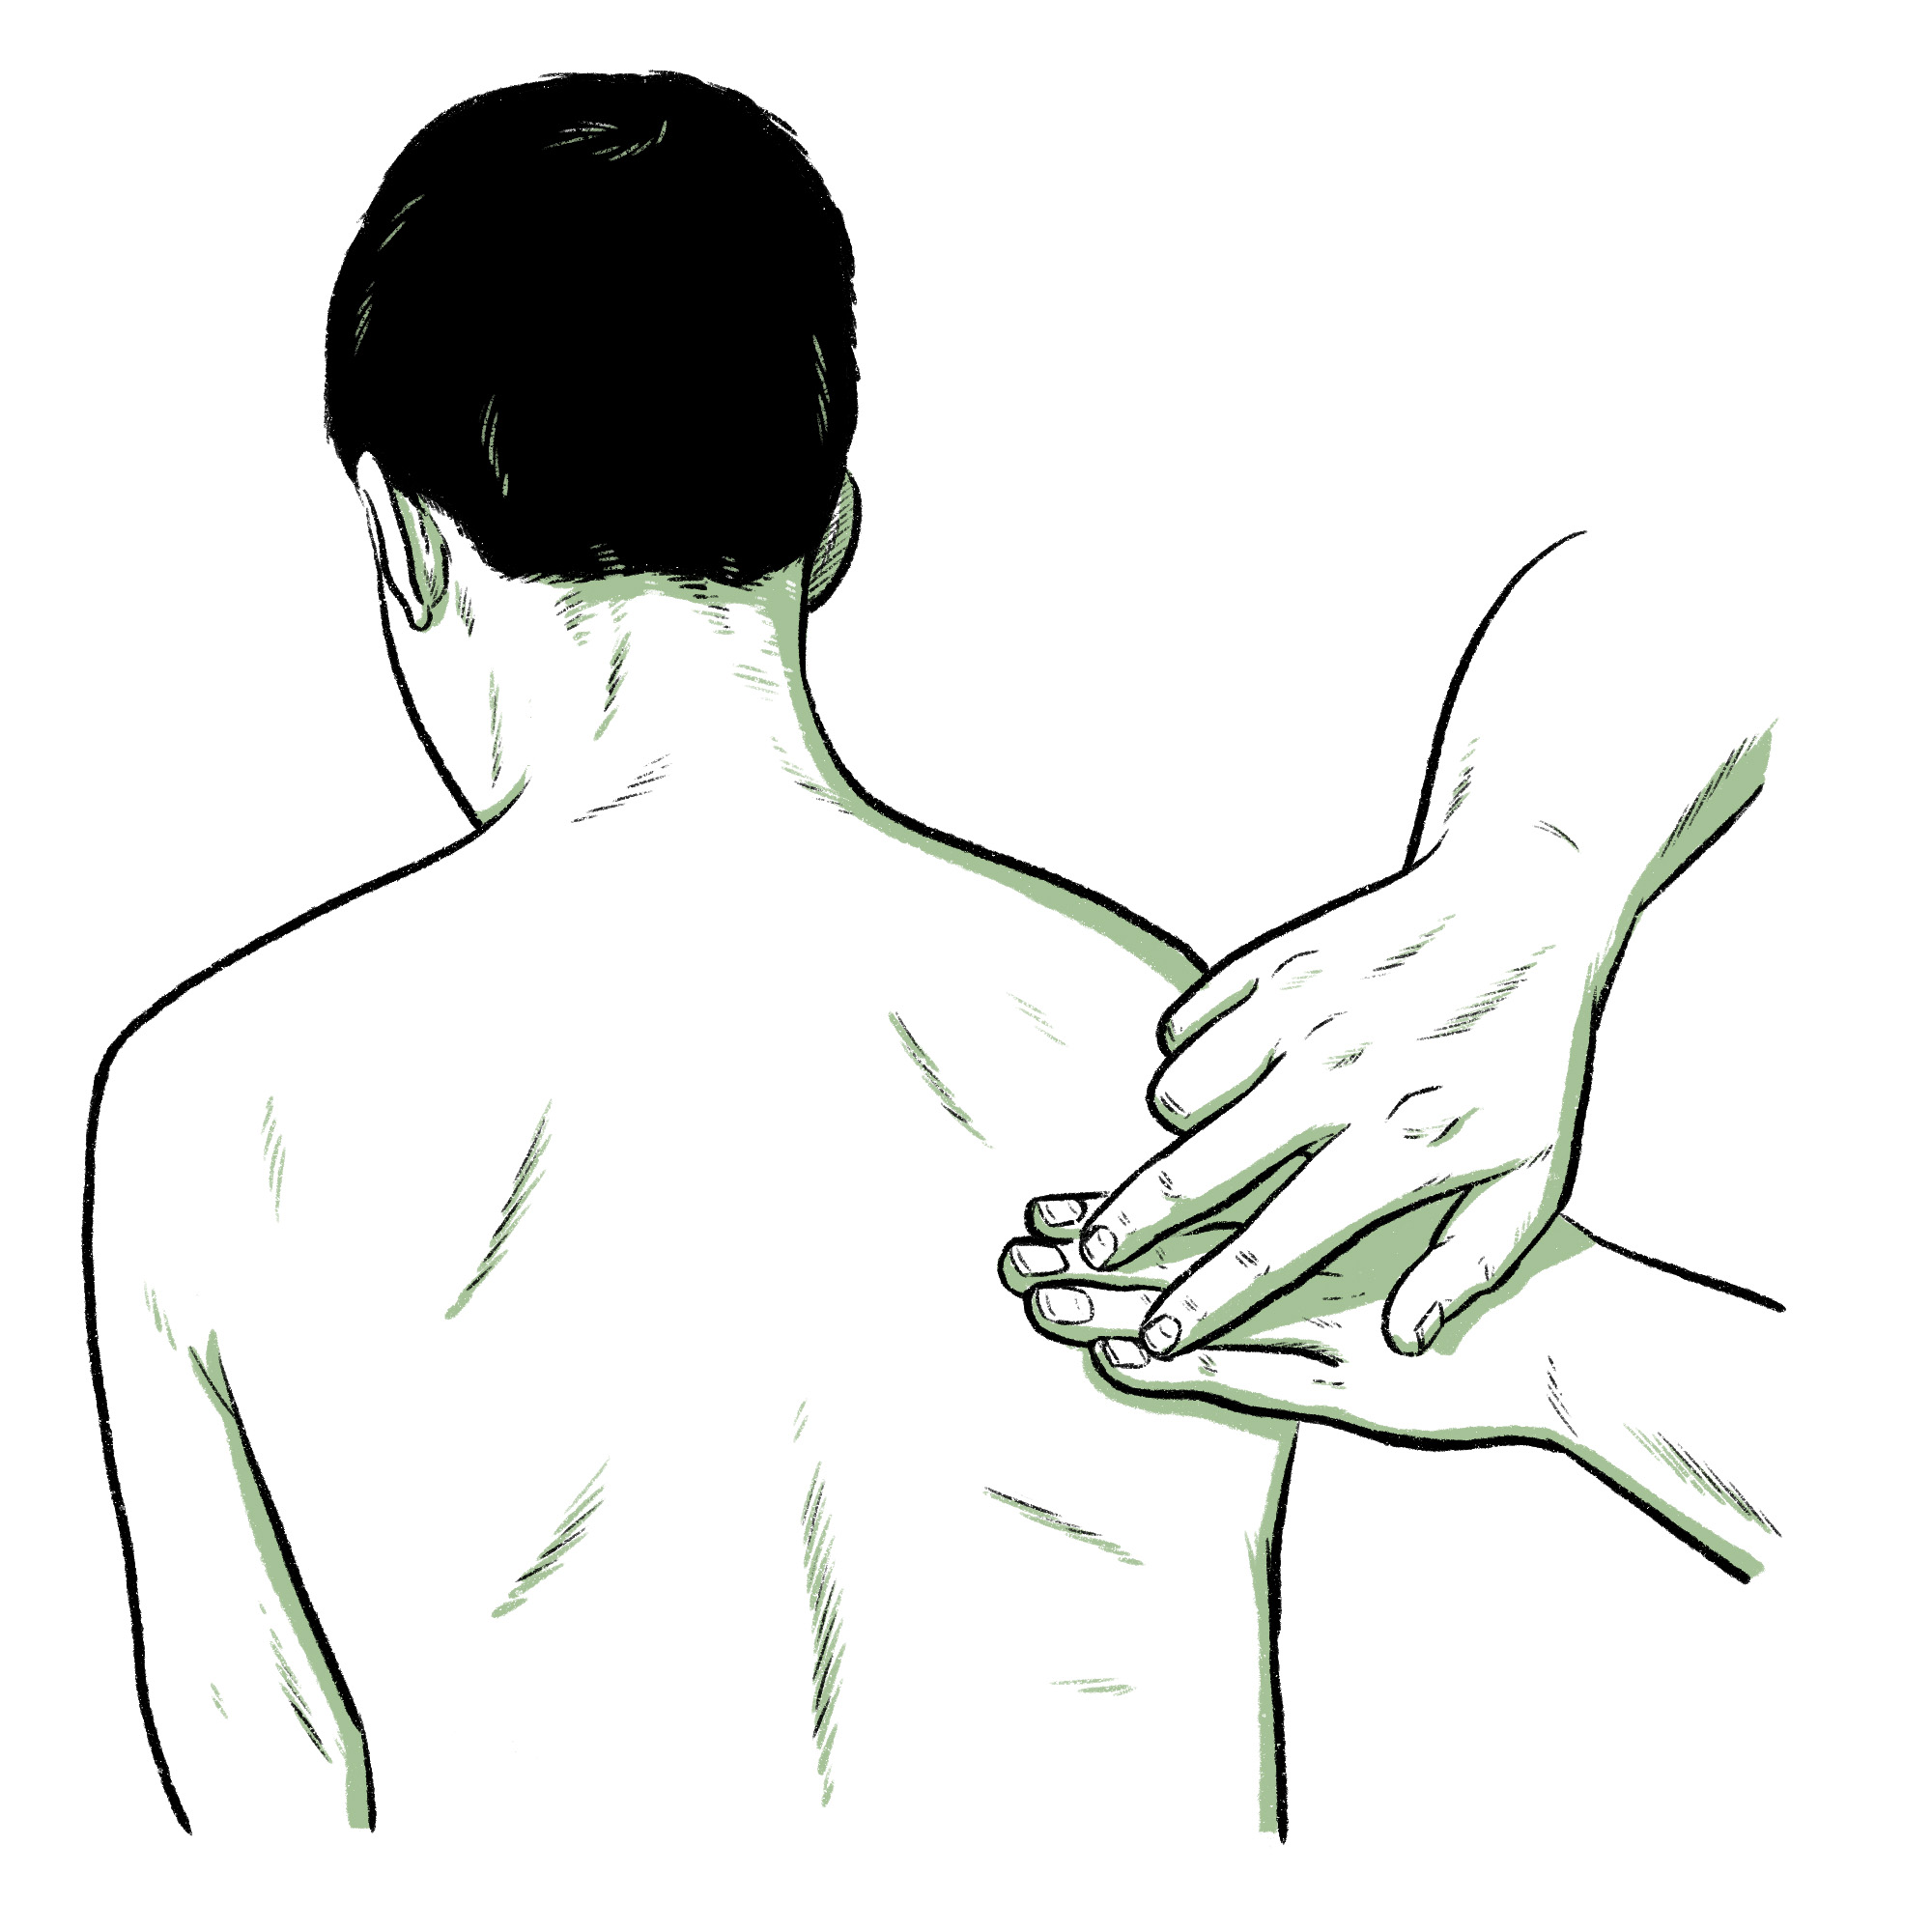 Illustration showing a person using percussion technique on the back of a patient